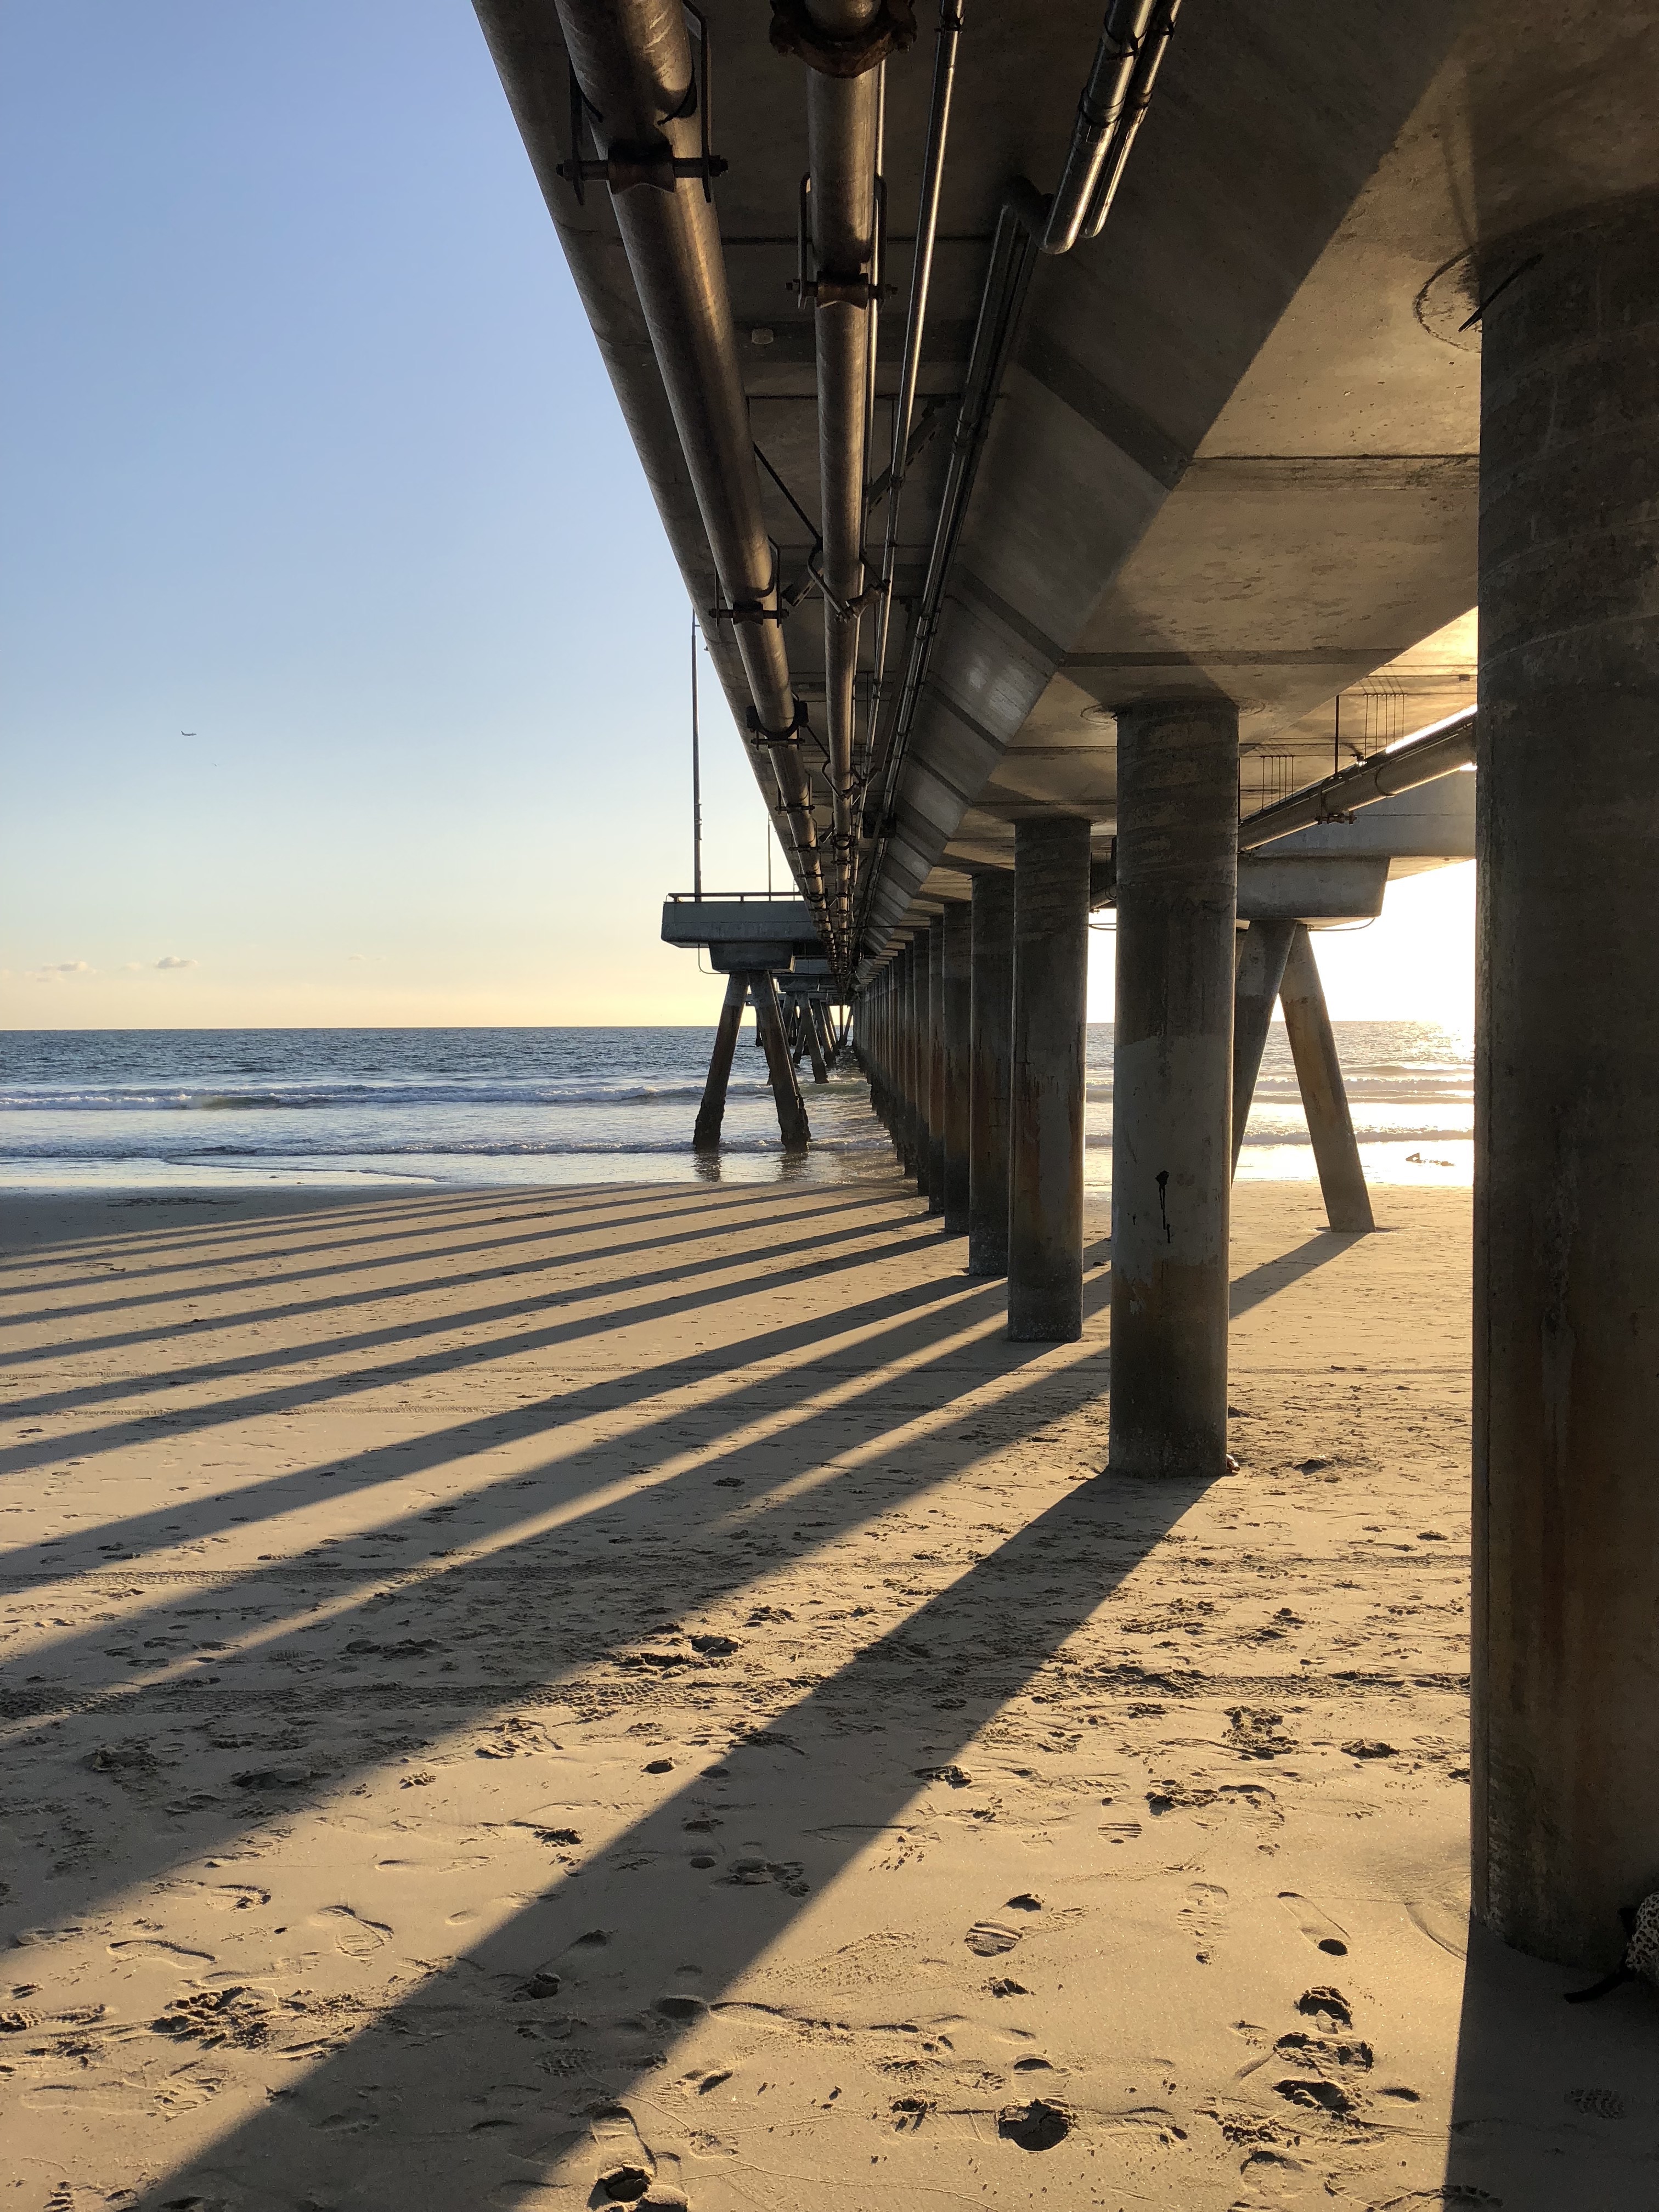 A view from under the Venice Beach pier